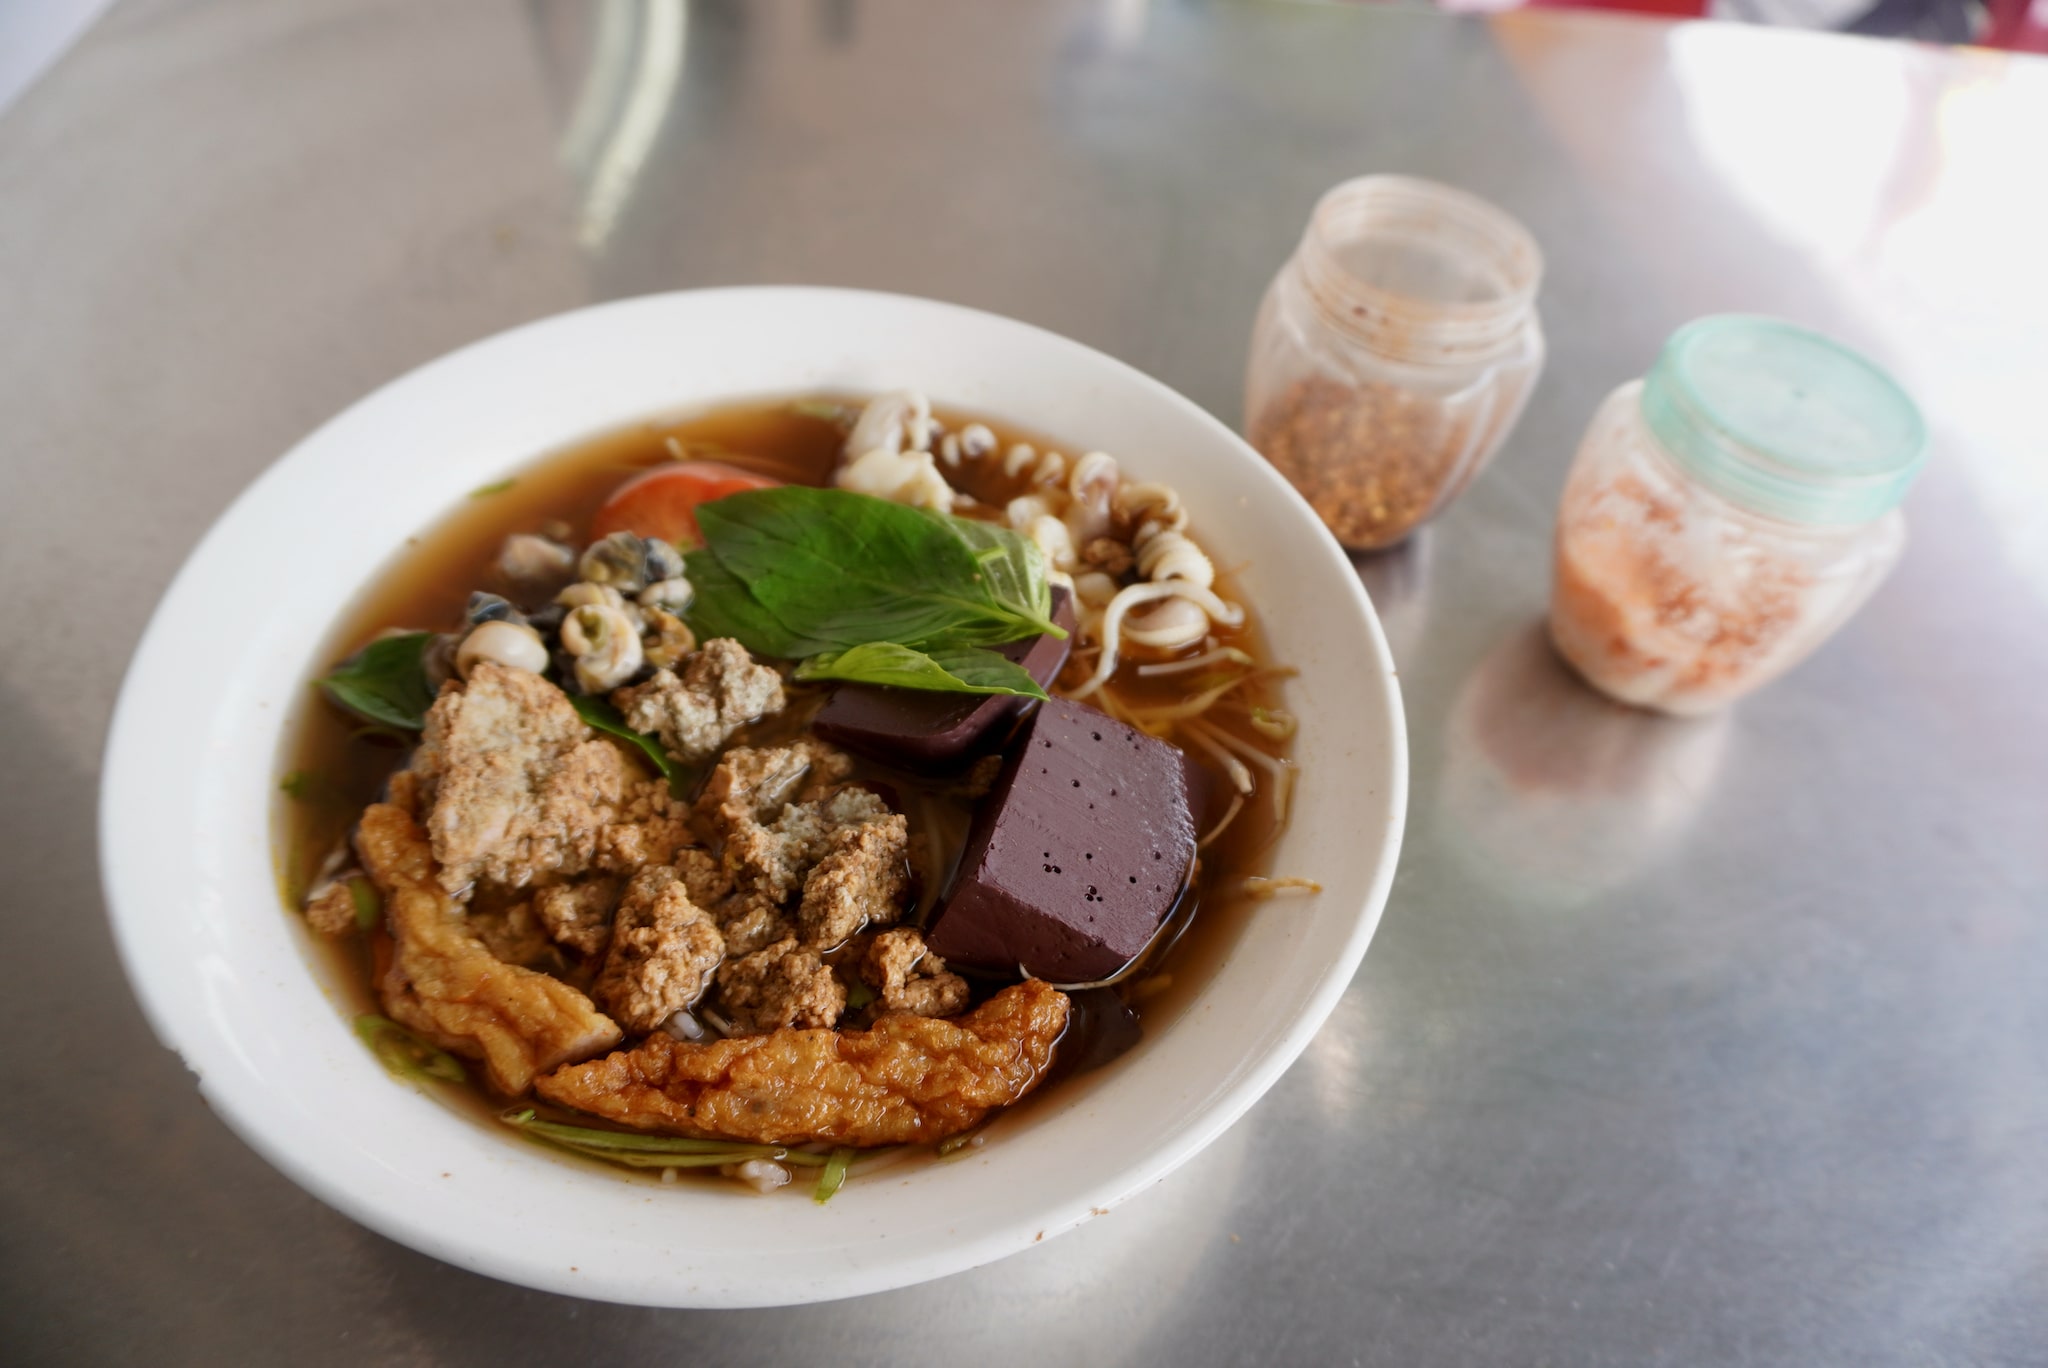 A bowl of snail noodle soup is priced at VND30,000 at Nguyen Tram eatery in Long Xuyen City. Photo: Xuan Tung / Tuoi Tre